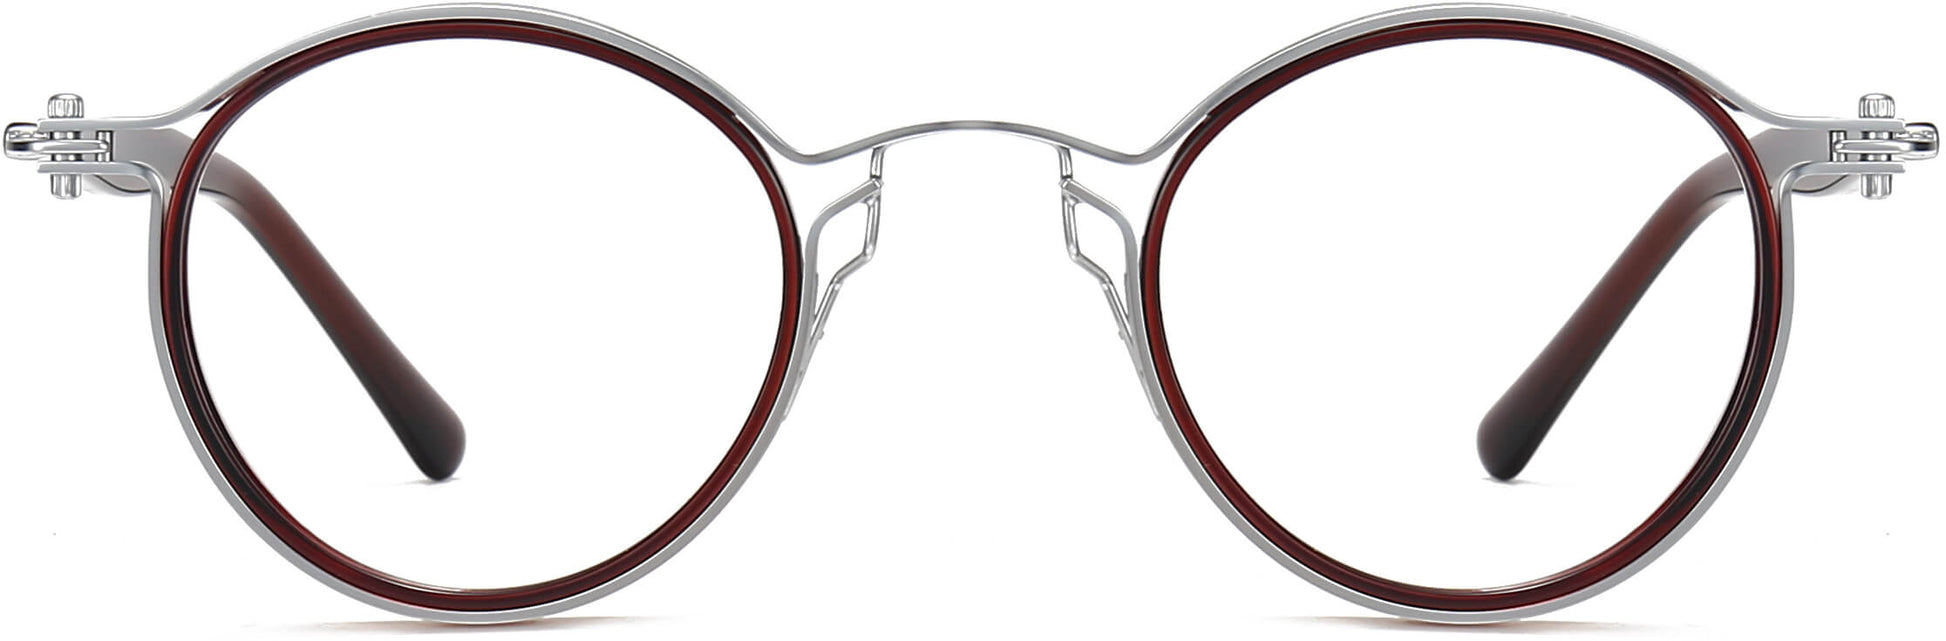 Keaton Round Silver Eyeglasses from ANRRI, front view